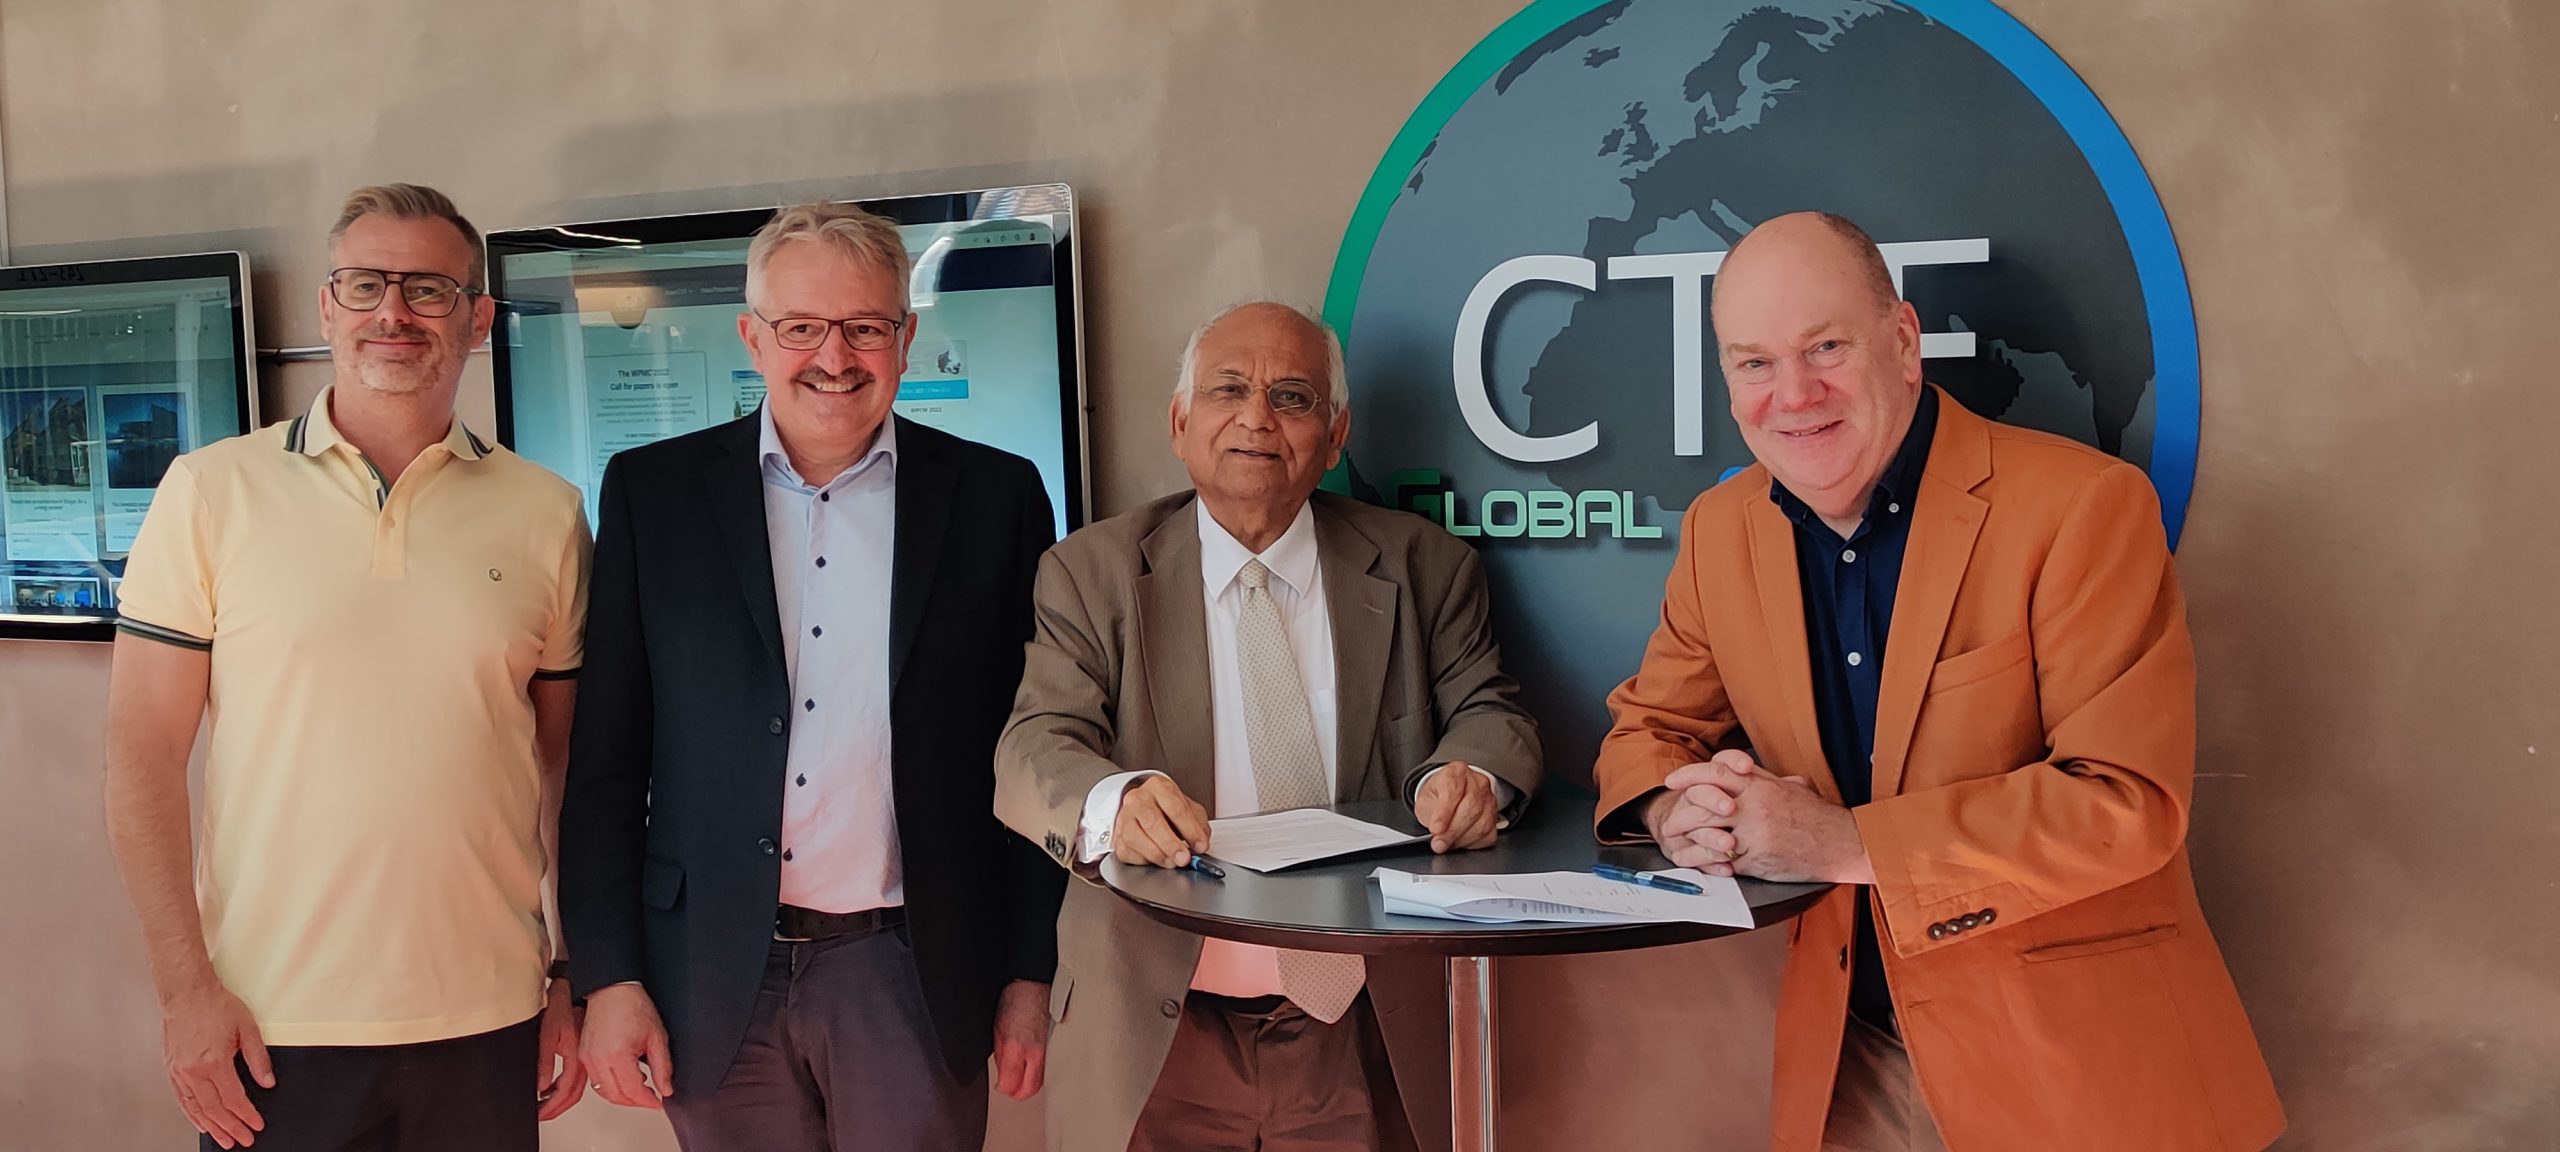 MoU Signed Between Wireless World Research Forum and CTIF Global Capsule (CGIC)